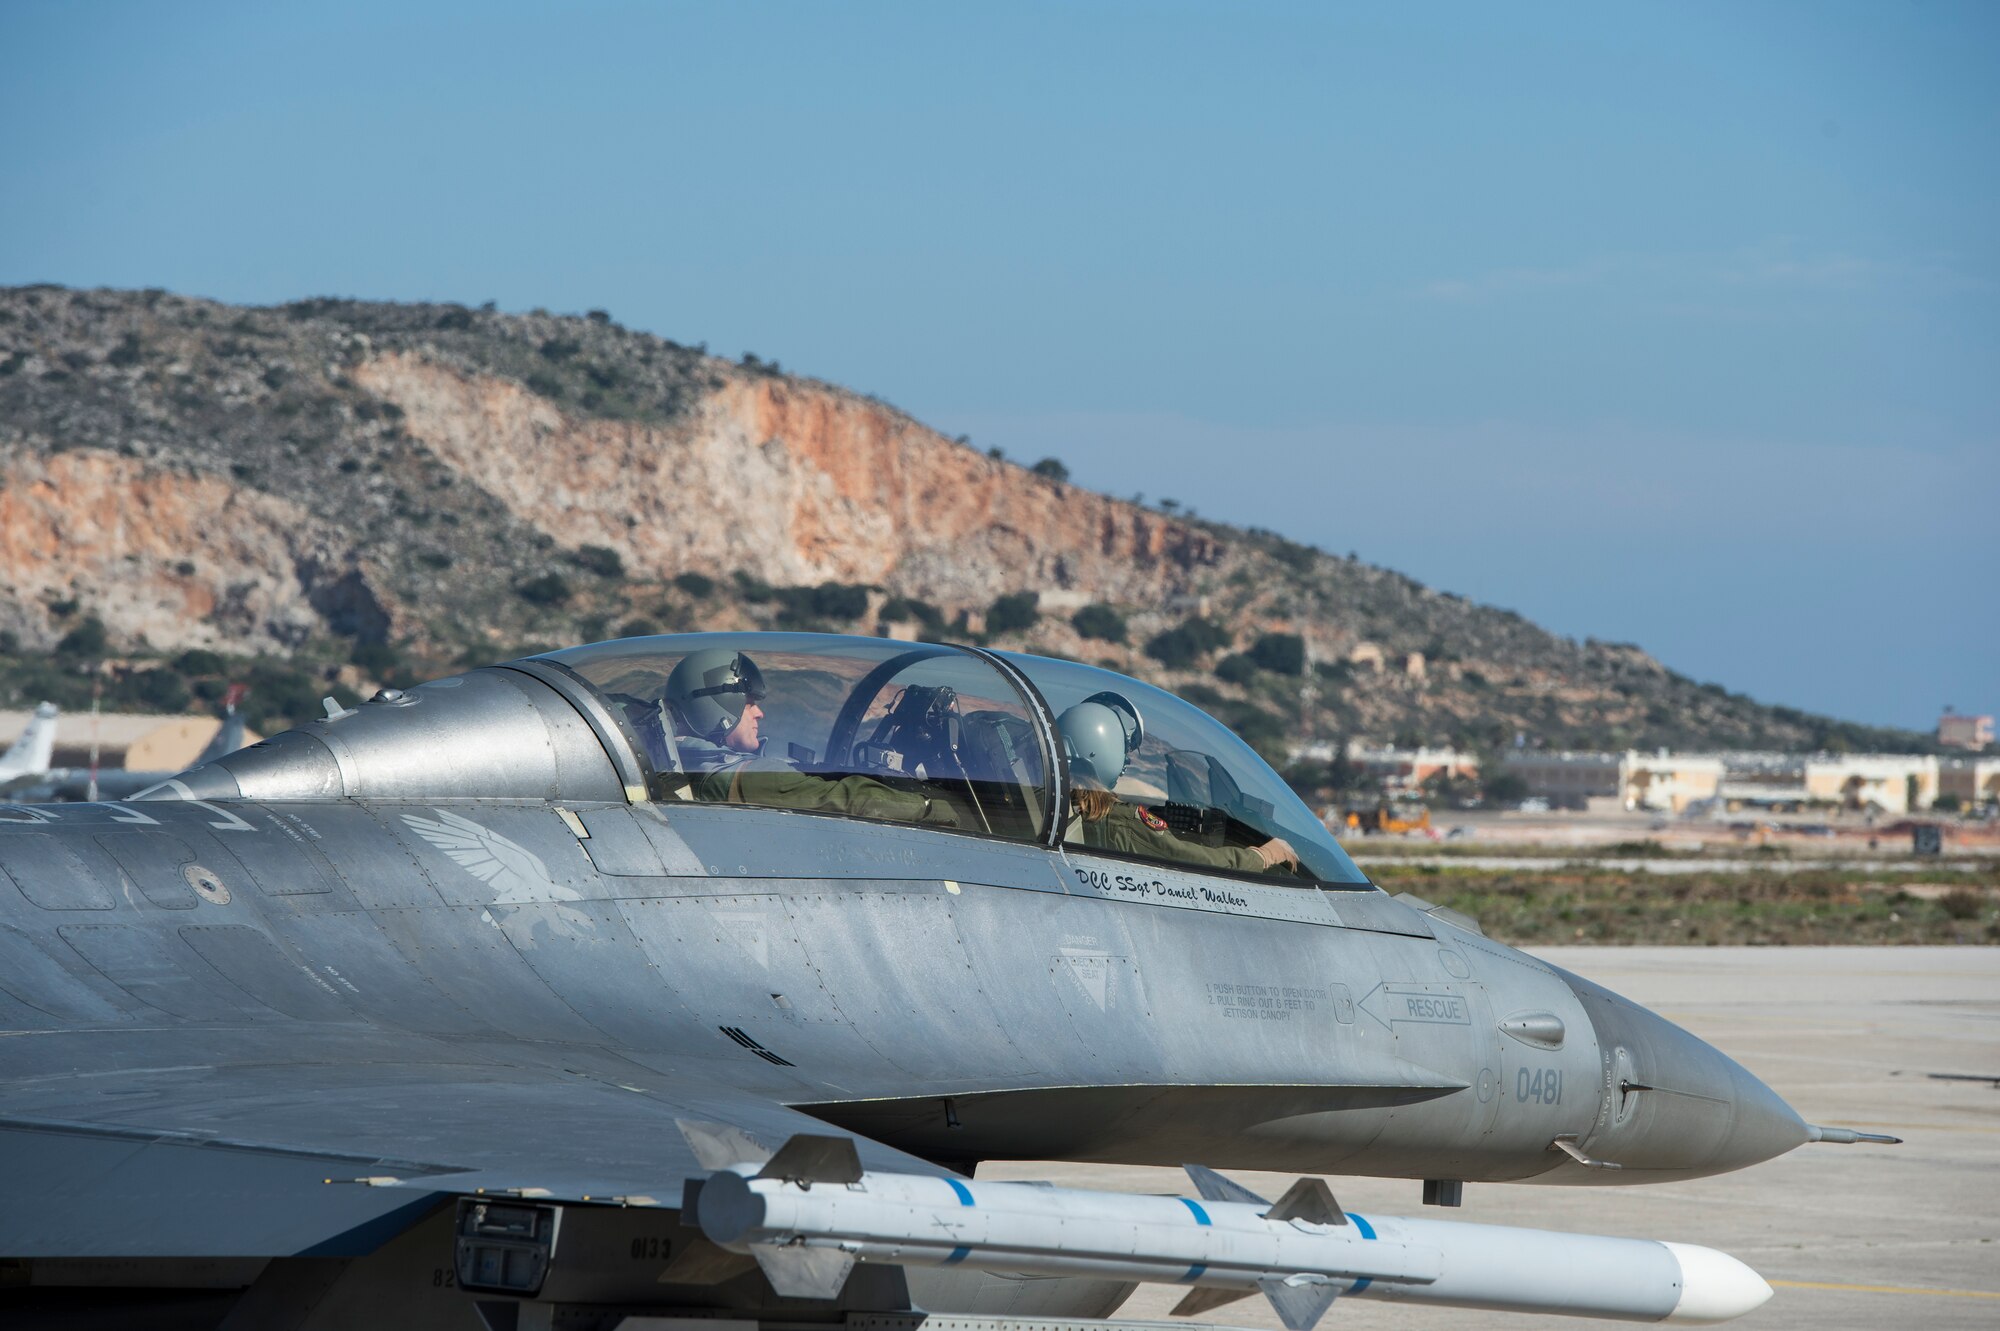 A U.S. Air Force F-16 Fighting Falcon fighter aircraft pilot assigned to the 480th Expeditionary Fighter Squadron carrying U.S. Air Forces in Europe and Air Forces Africa commander Gen. Frank Gorenc, taxi down the flightline during a training mission at Souda Bay, Greece, Feb. 1. 2016.  Gorenc took to the skies with the 480th EFS to experience firsthand the flying training deployment being conducted with the Hellenic air forces. (U.S. Air Force photo by Staff Sgt. Christopher Ruano/Released)